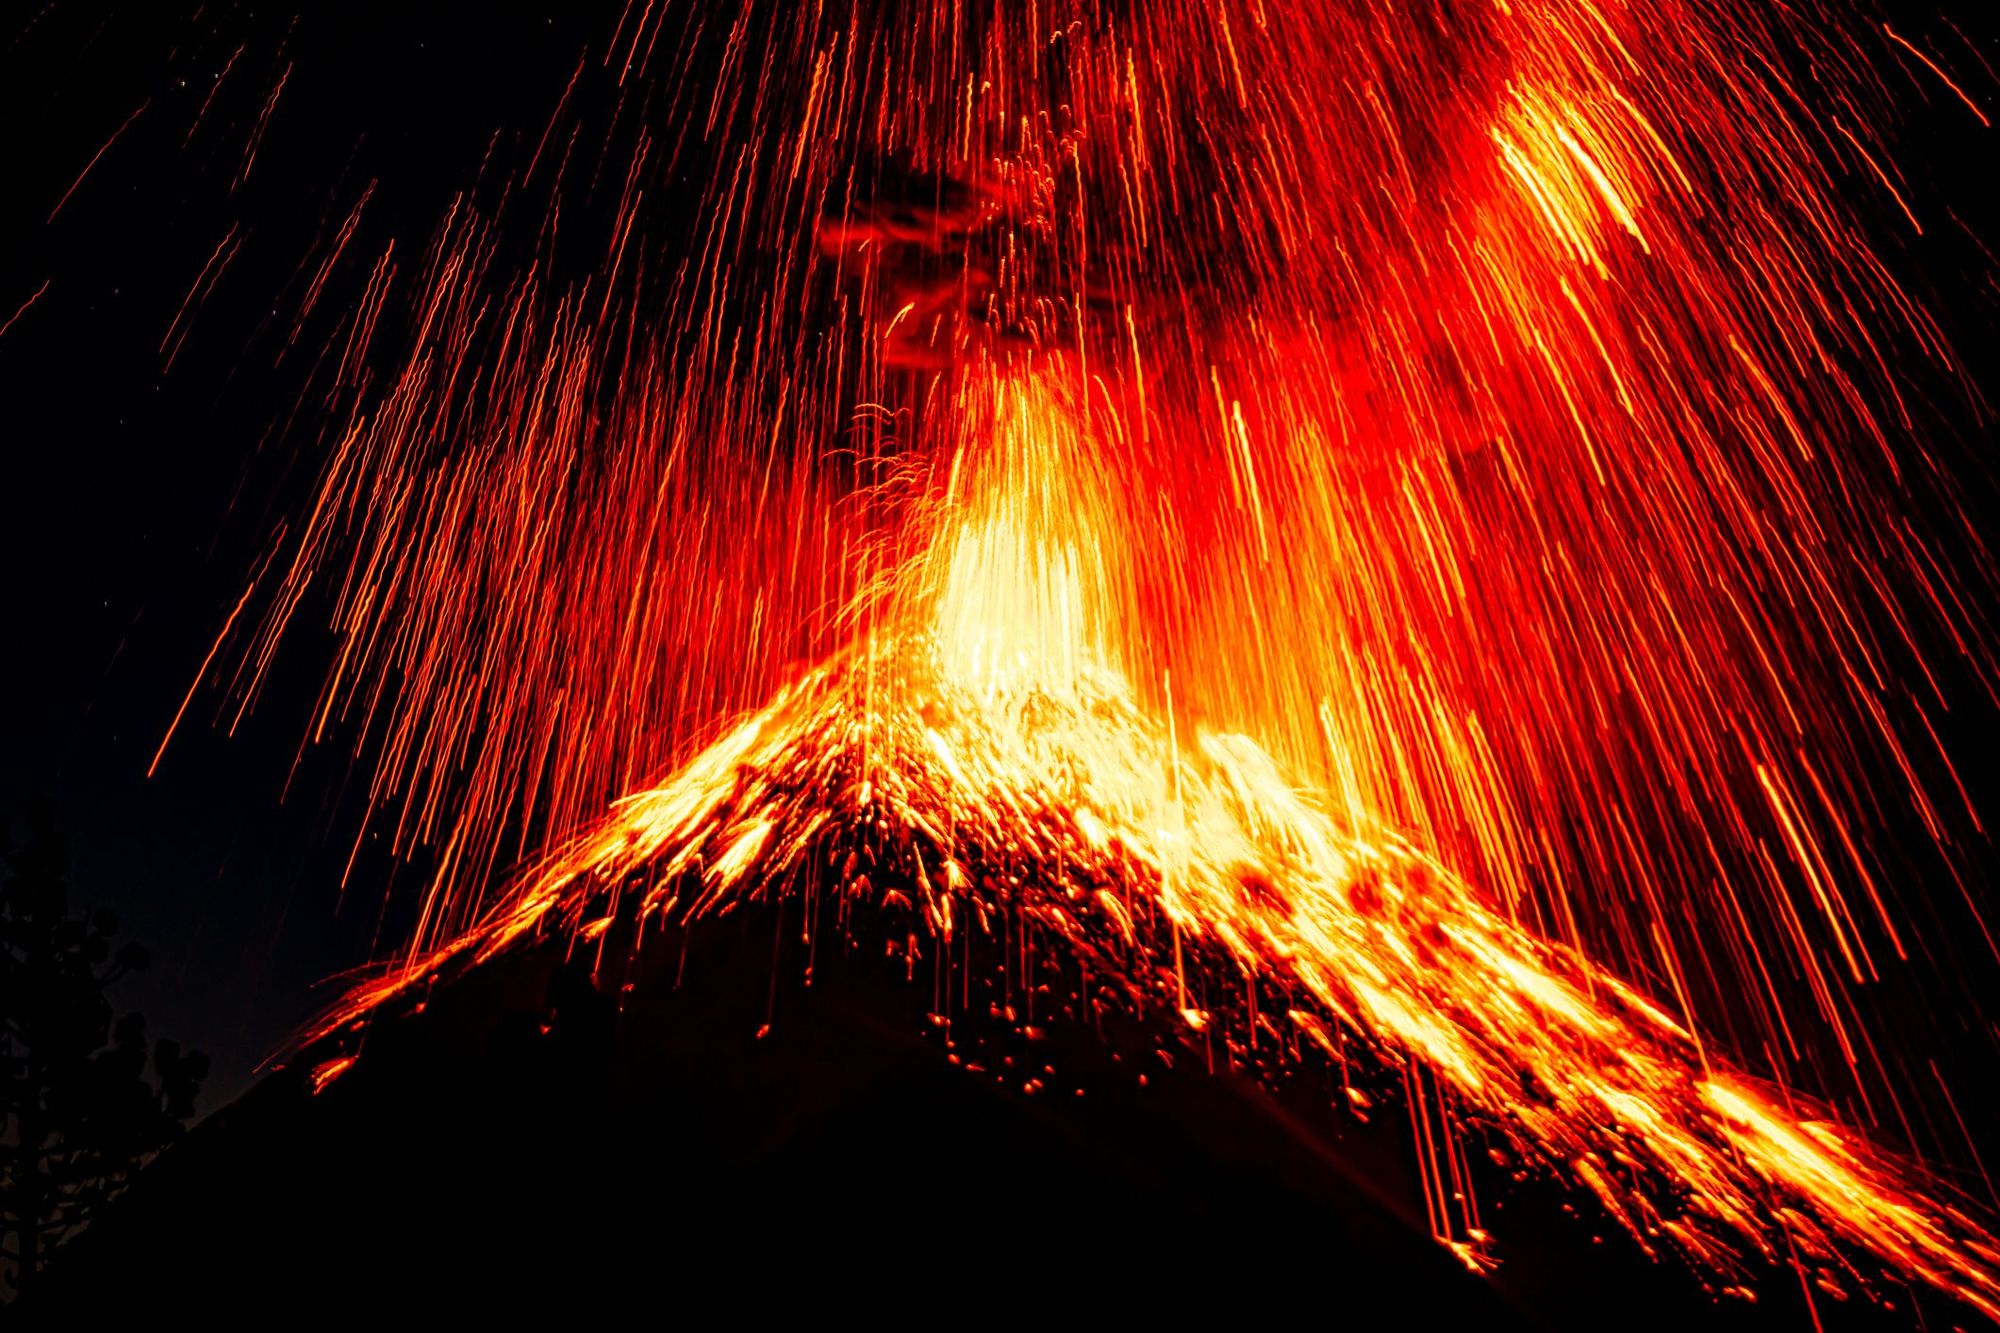 The power of Volcán de Fuego - or any other active volcano - must never be underestimated. Photo: Getty.